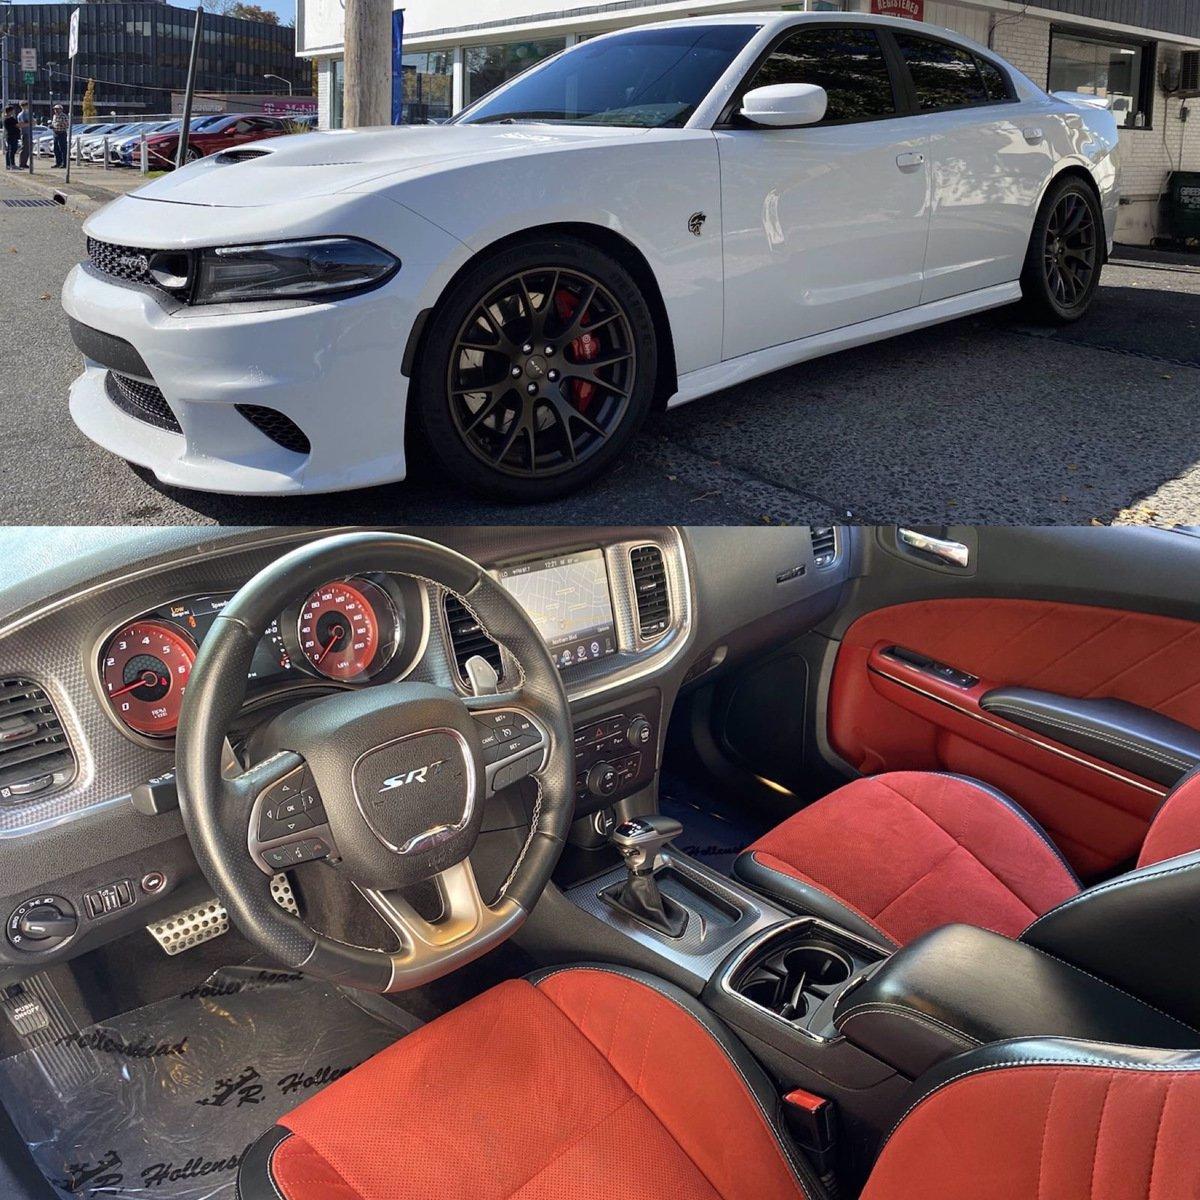 2016 Dodge Charger SRT Hellcat Stock # C1446-A for sale near Great Neck, NY  | NY Dodge Dealer